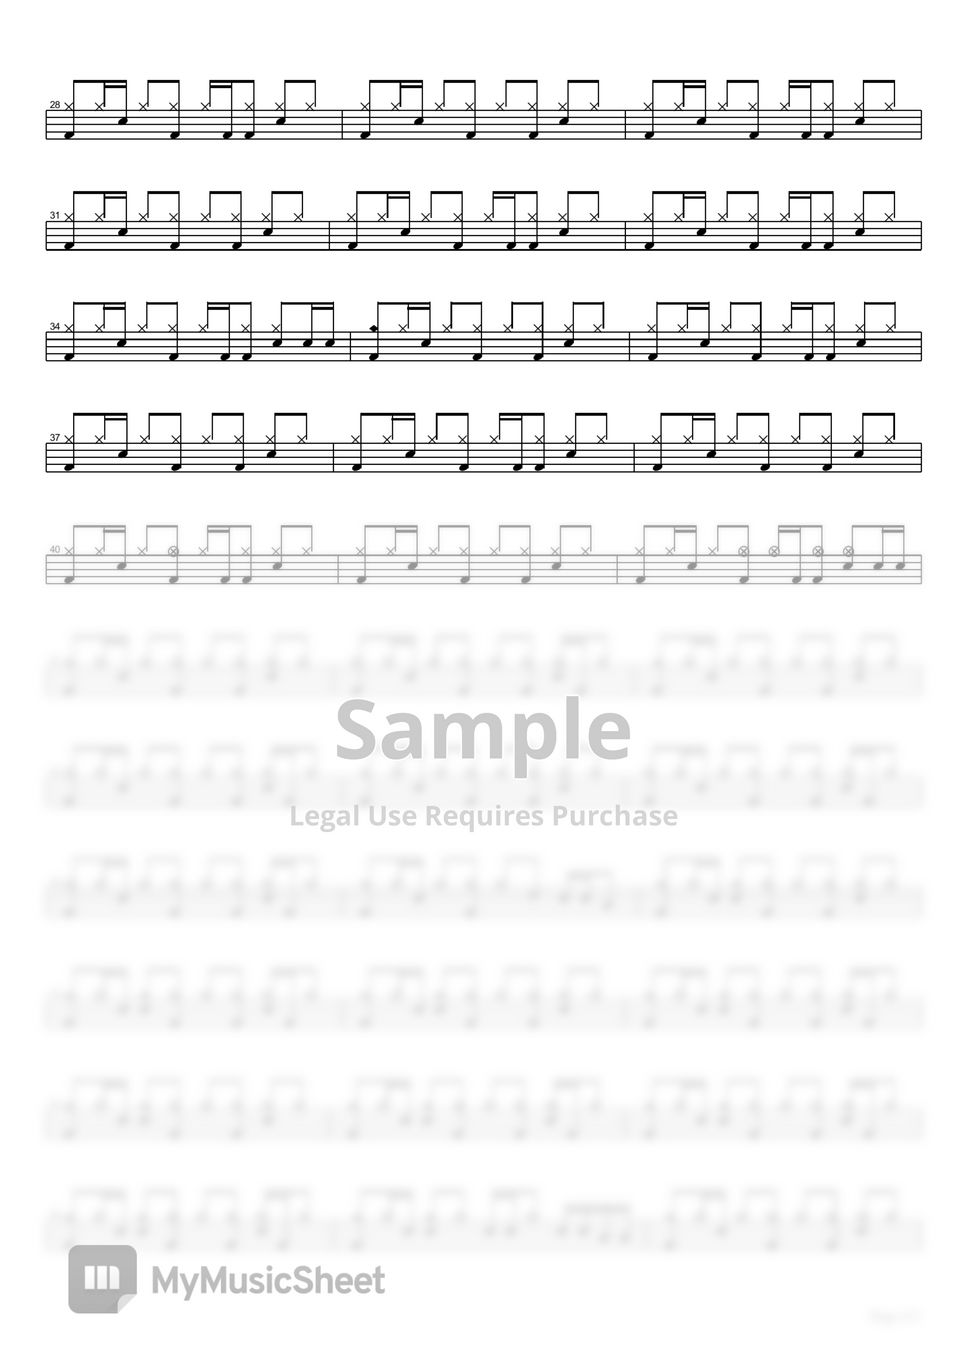 Linkin Park - Numb(Drum Sheet) by kyle yeung